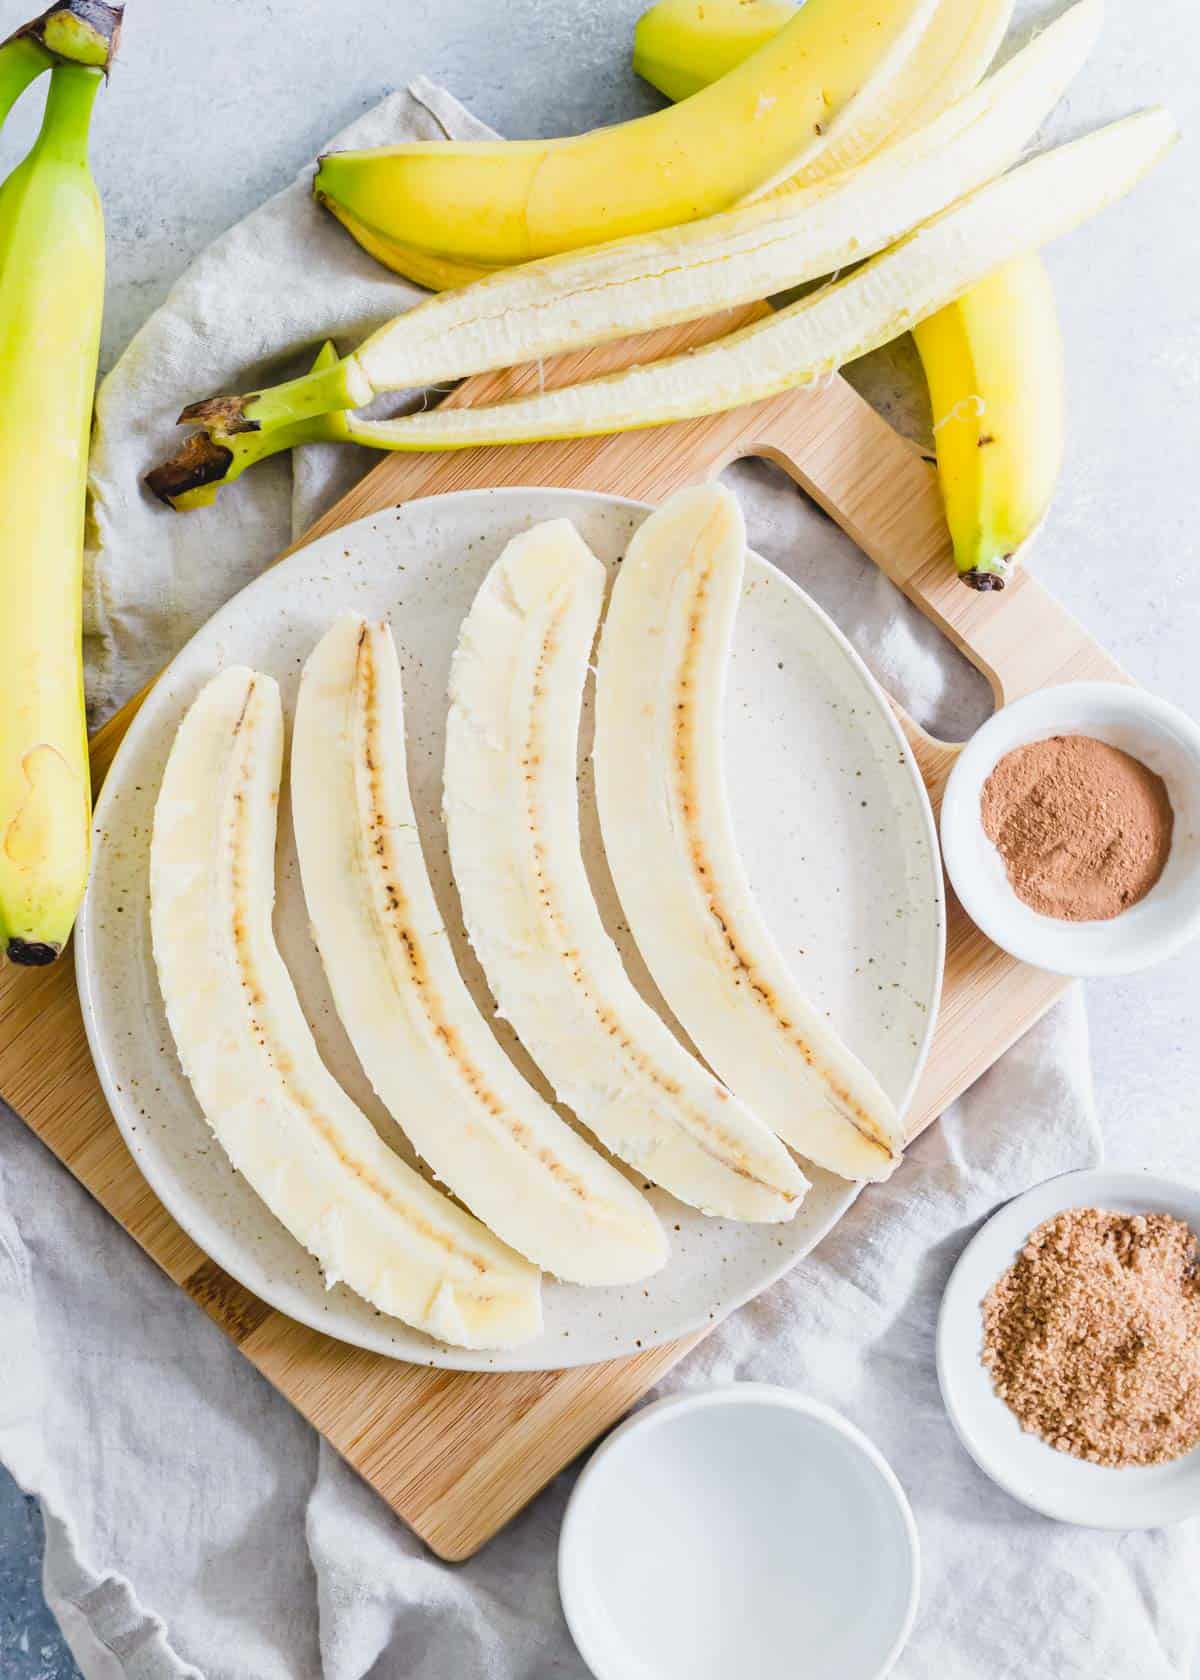 Bananas halves on a plate with cinnamon spices, brown sugar and melted coconut oil in bowls on the side.